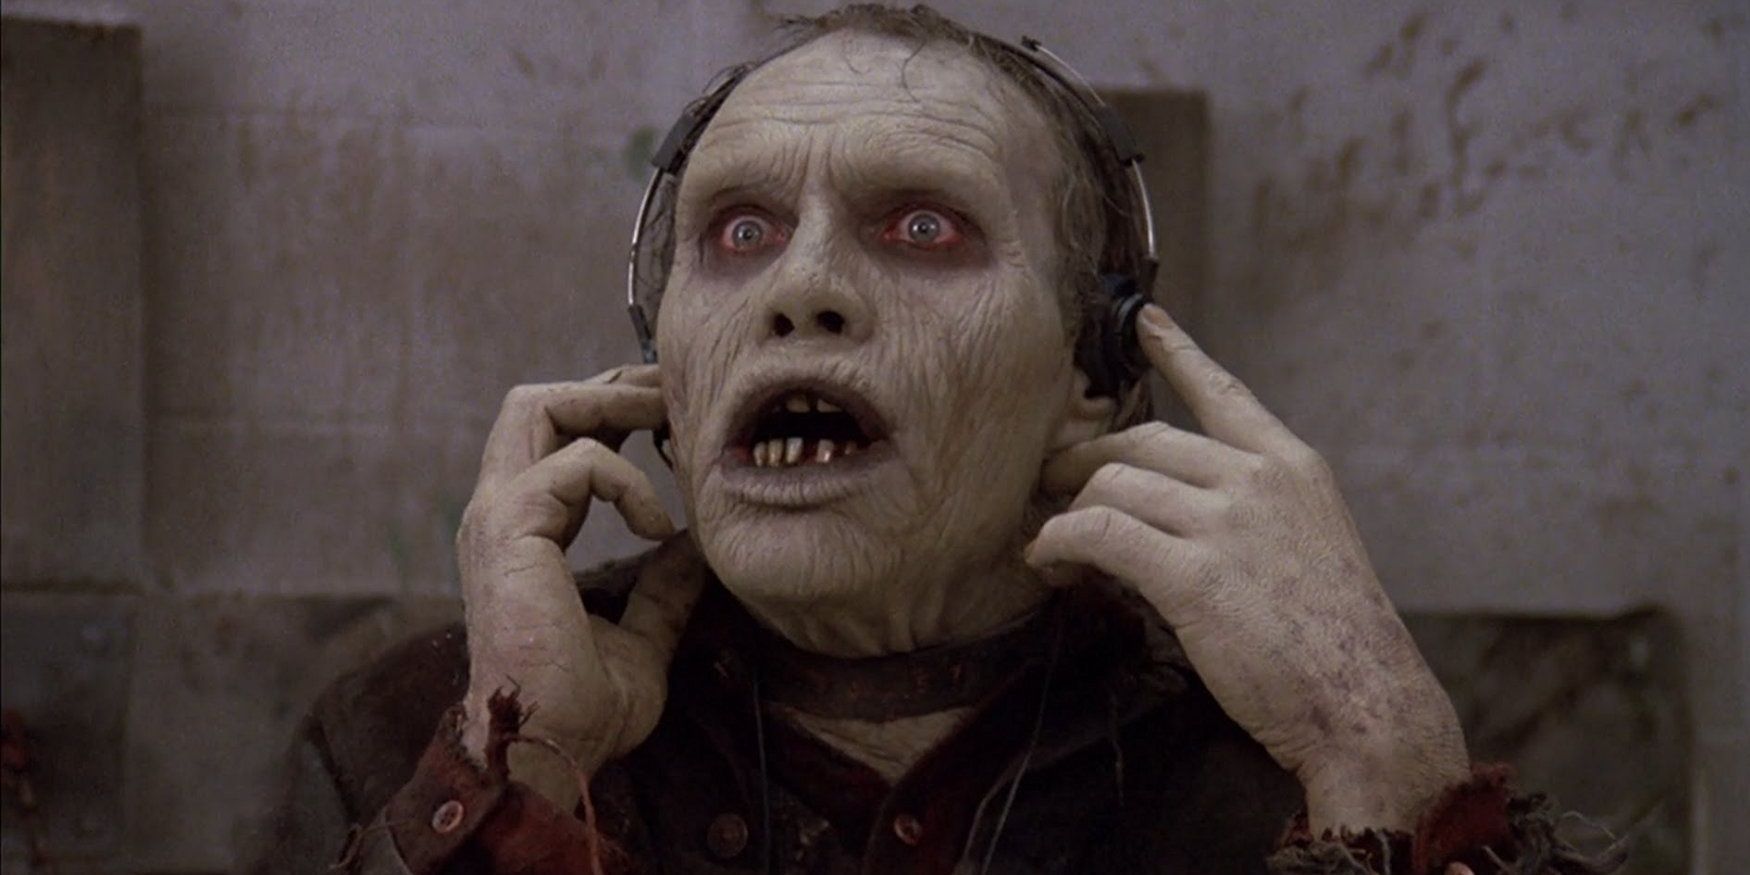 Bub listens excitedly to music on headphones in Day of the Dead